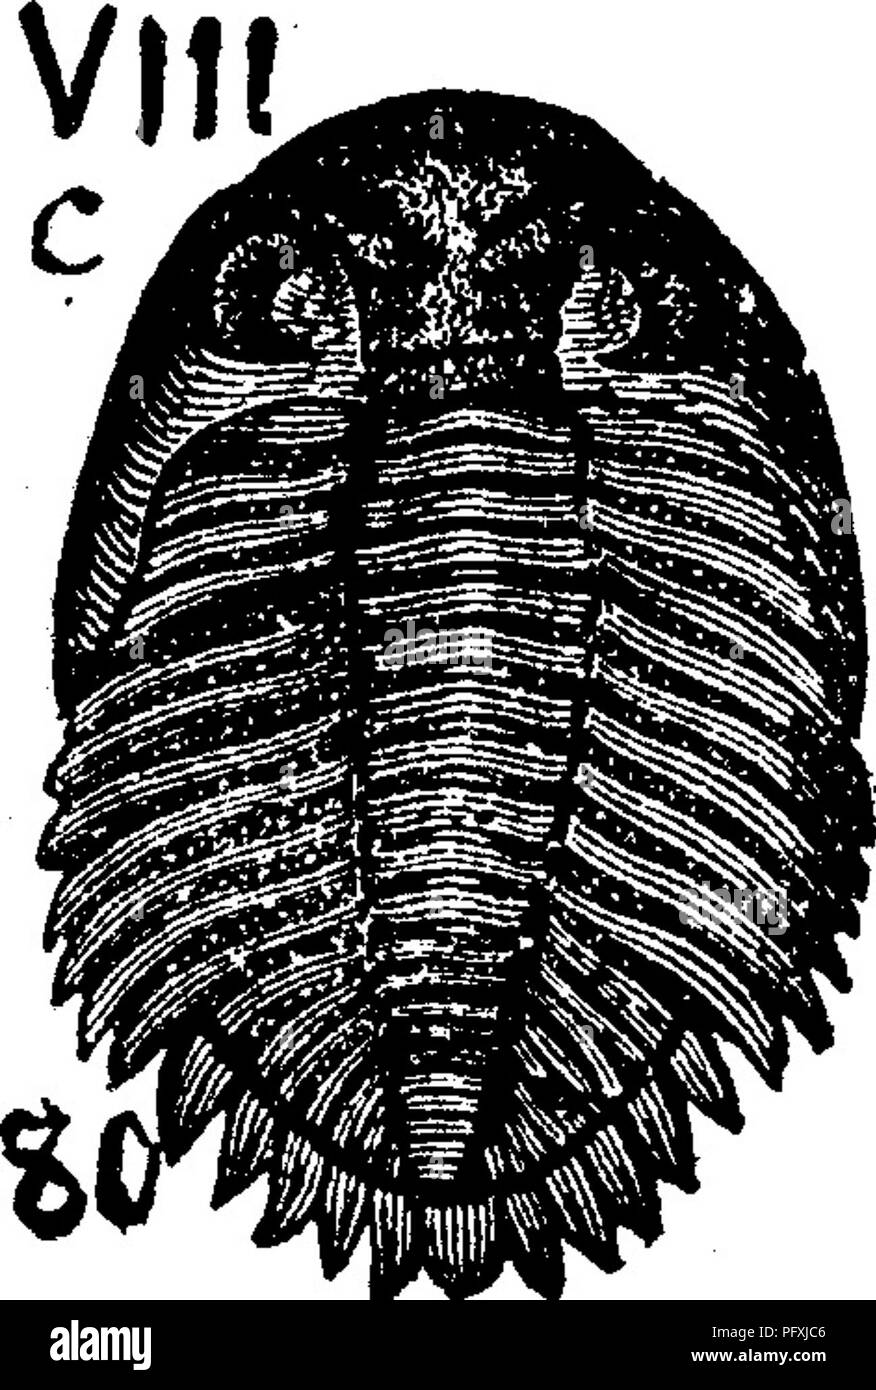 . A dictionary of the fossils of Pennsylvania and neighboring states named in the reports and catalogues of the survey ... Paleontology. Dalm. 188. Dalmanites calliteles. (Cryphceus calliteles) Hall, page 200, fig. 80, 2. Hamilton formation. (Green, Amer. Jour. Sci. and Arts, Boston, 1837)—Clay- pole, Keport F2, xiv; also 000, 1888, collec- tions in Perry Co., Pa. (Spec. 2-2), five spec, from Comp's mill, 2| m. S. E. of New Bloomfield; (5- 8,47, 135) nineteen from Barnett's mills; (77 d-14:, 99-13, 14) five from Drumgold's tannery; 110-25, two from Brickfield, 1 m. S. W. of N. B.; (118-10,12,1 Stock Photo